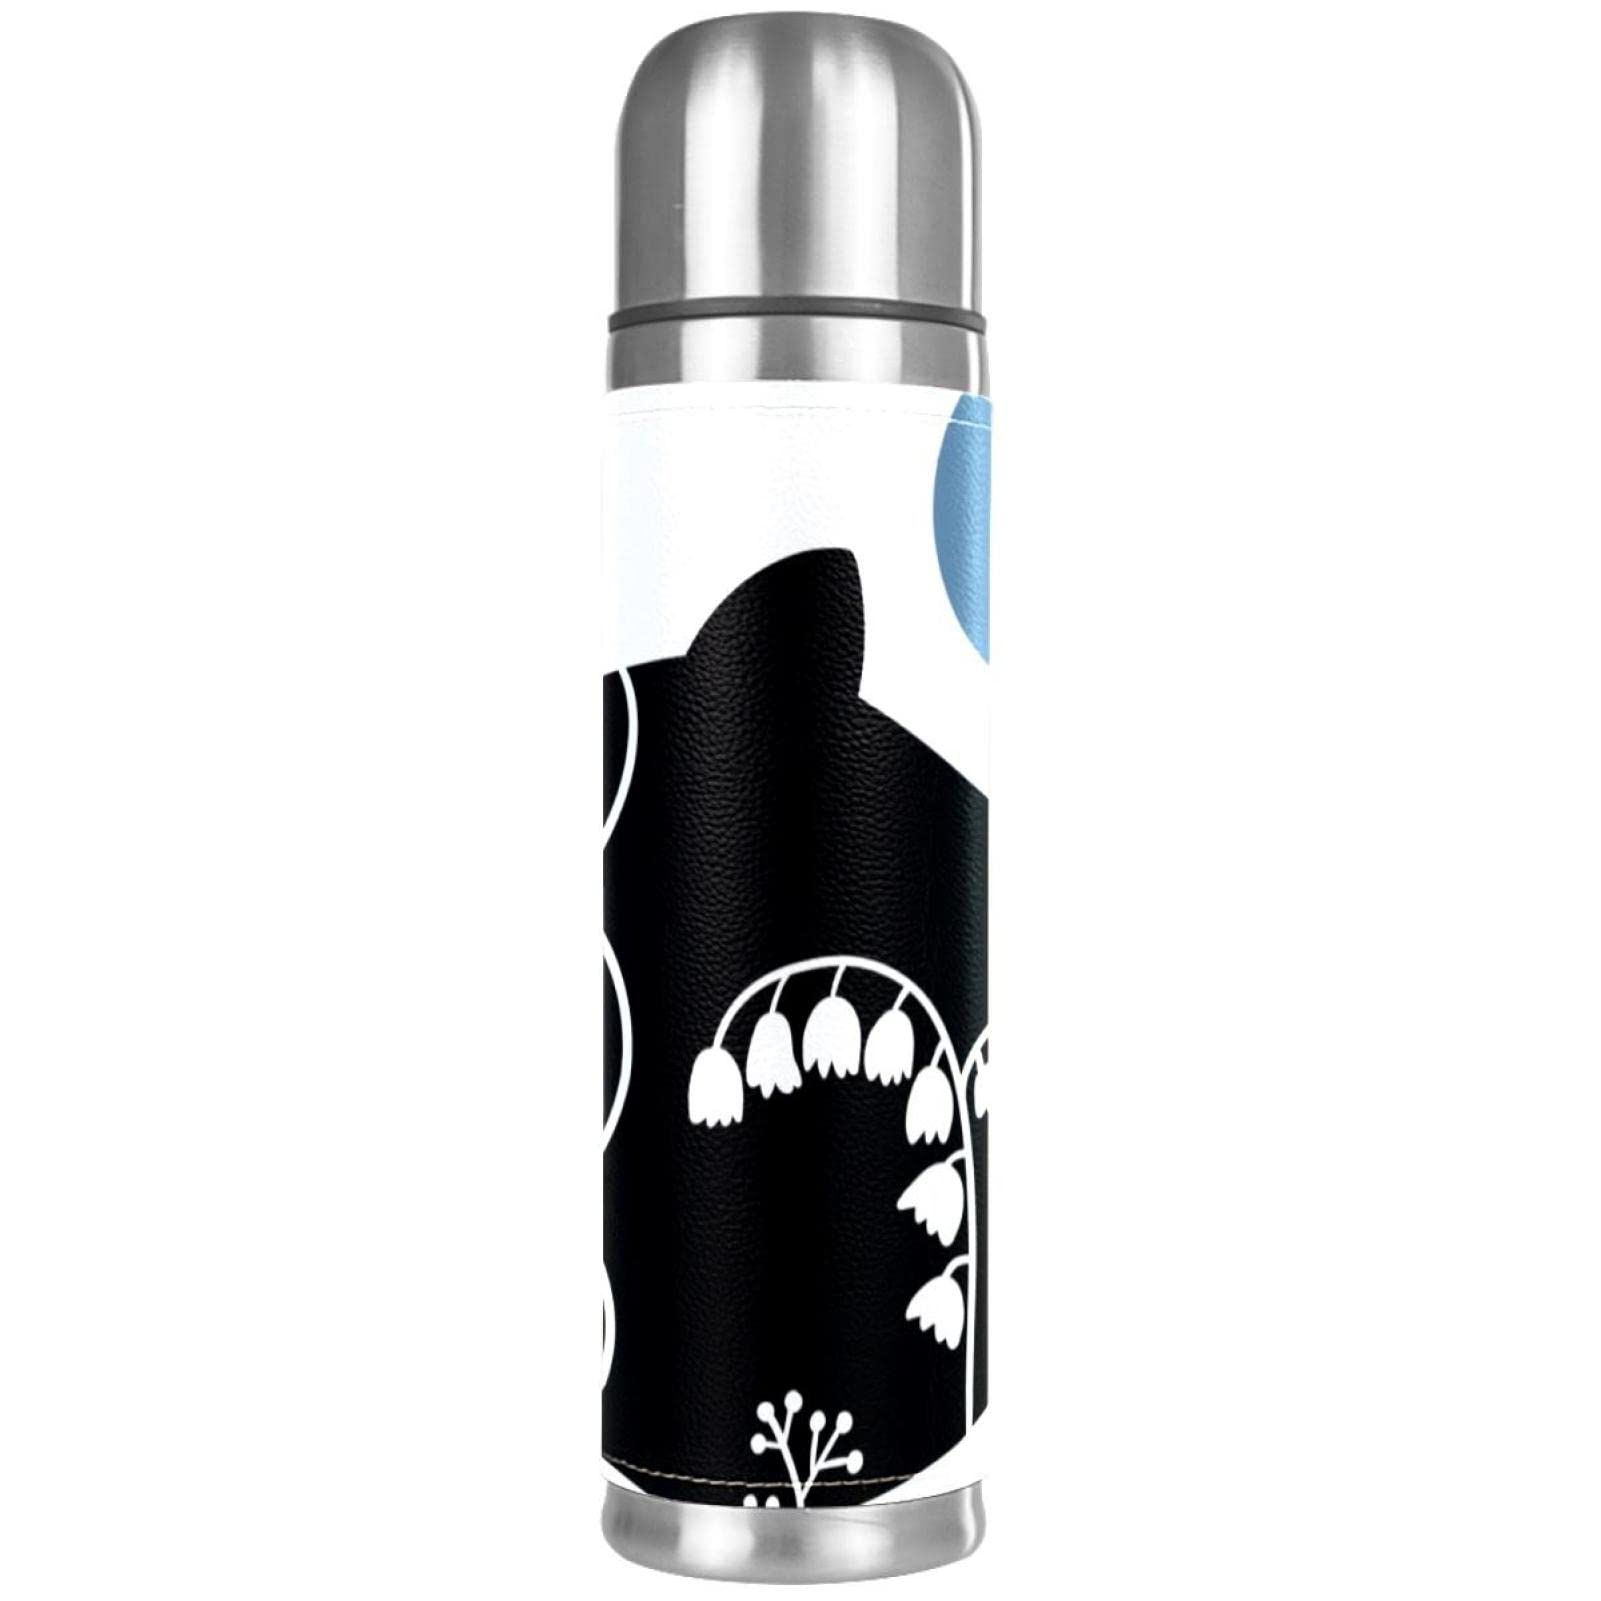 Stainless Steel Leather Vacuum Insulated Mug Fish Silhouette Thermos Water Bottle for Hot and Cold Drinks Kids Adults 16 Oz